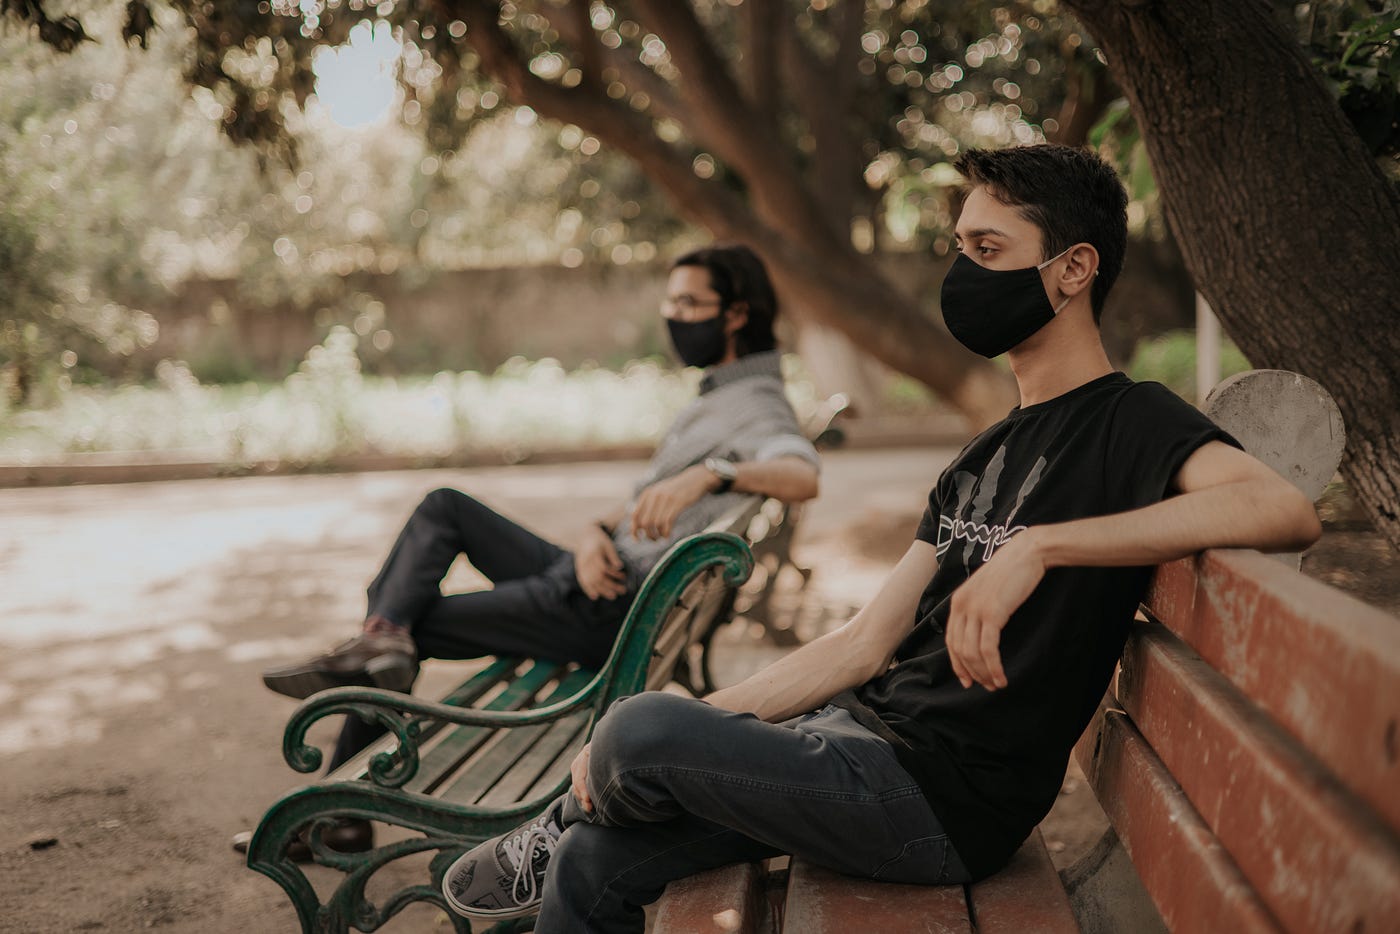 Two people sitting on park benches, seated far away from each other, wearing black cloth face masks